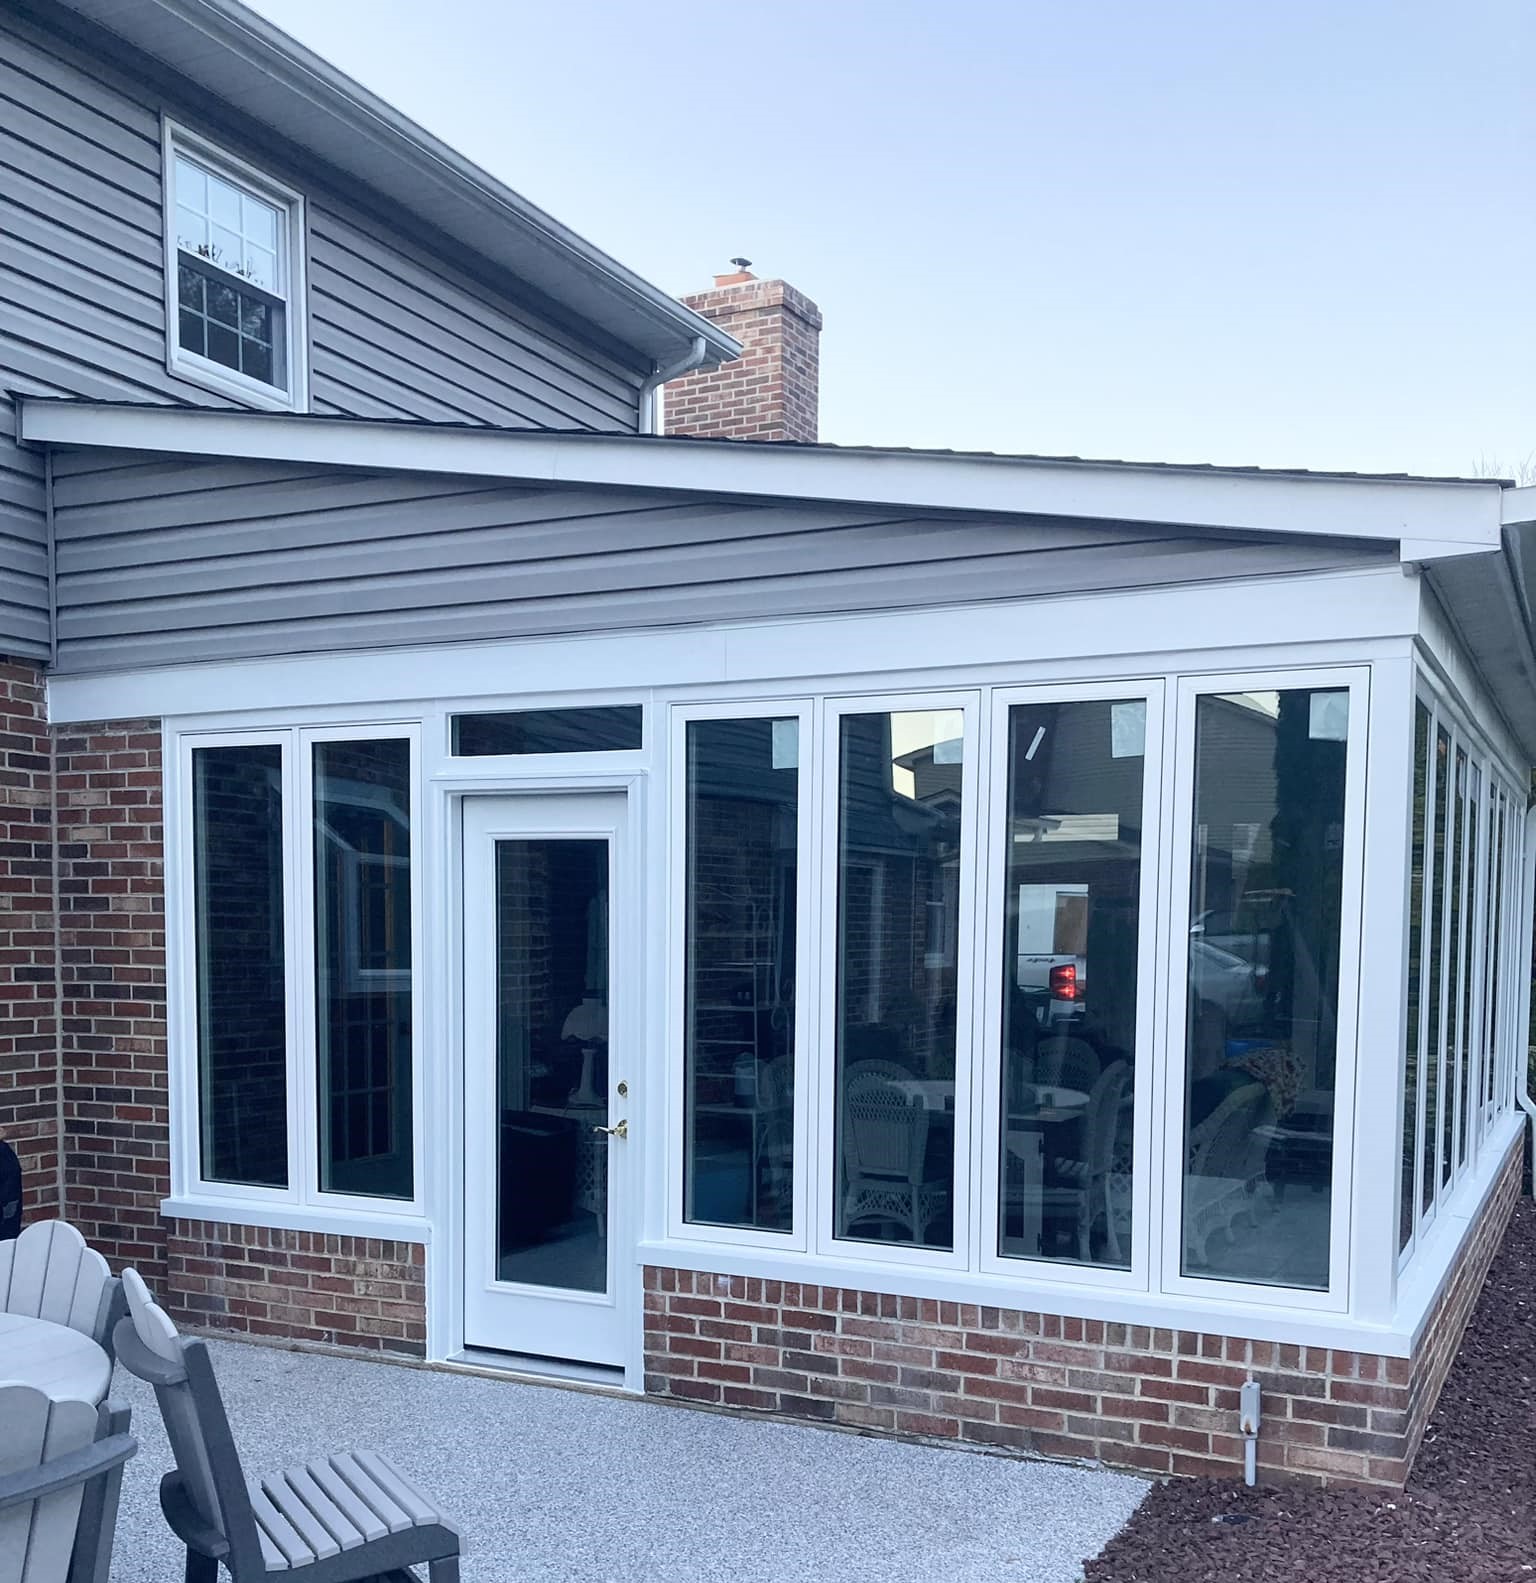 New Casement Windows and Entry Door in a Sunroom in West Chester, PA